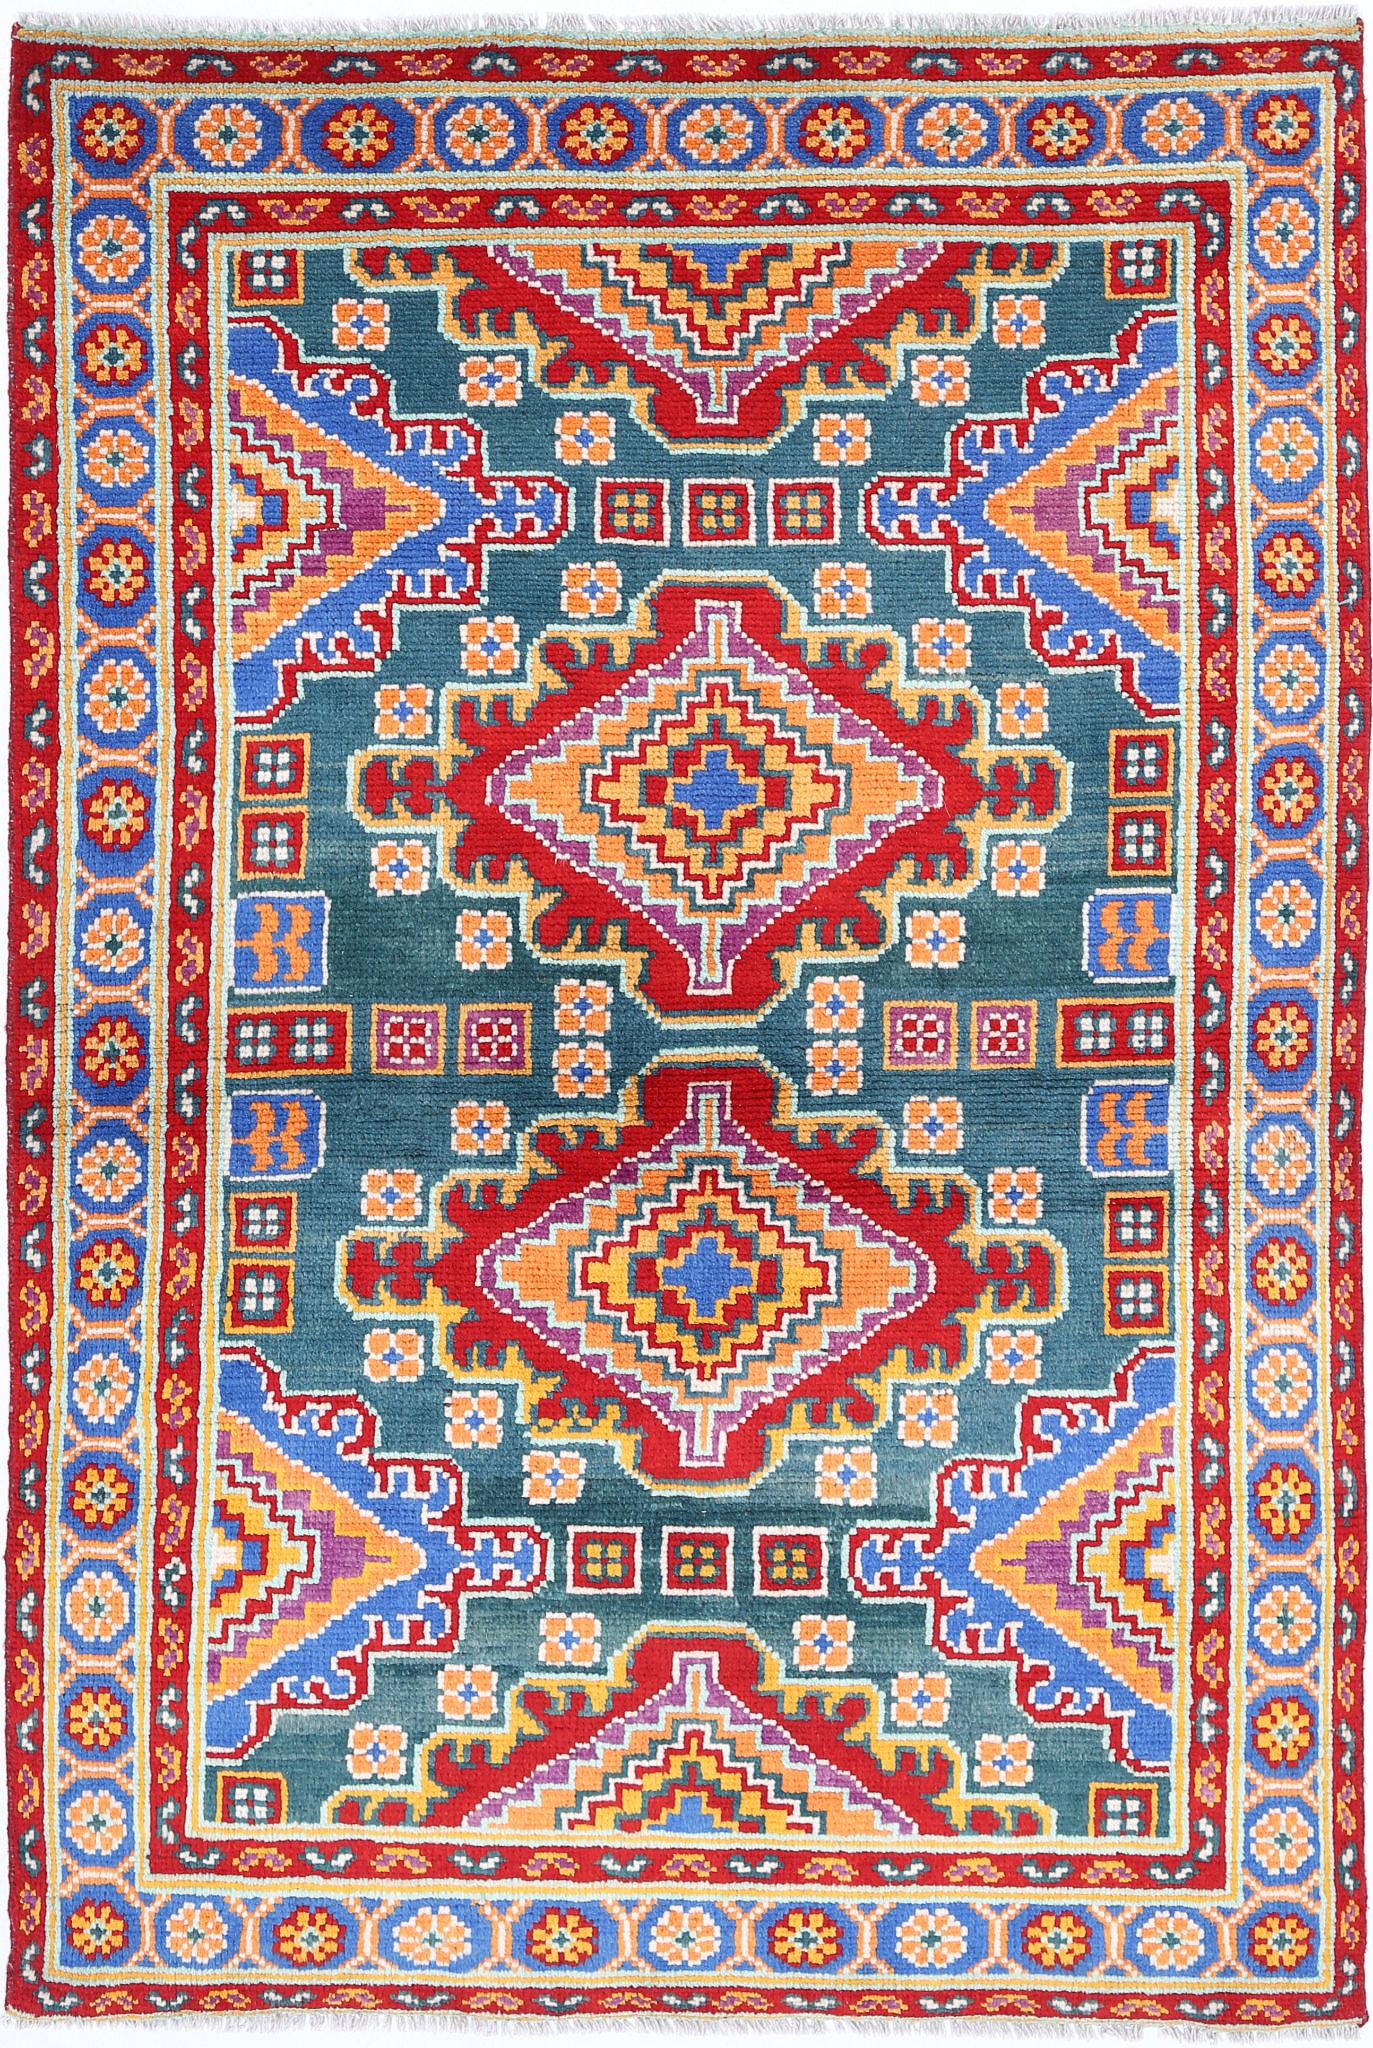 Revival-hand-knotted-qarghani-wool-rug-5014061.jpg